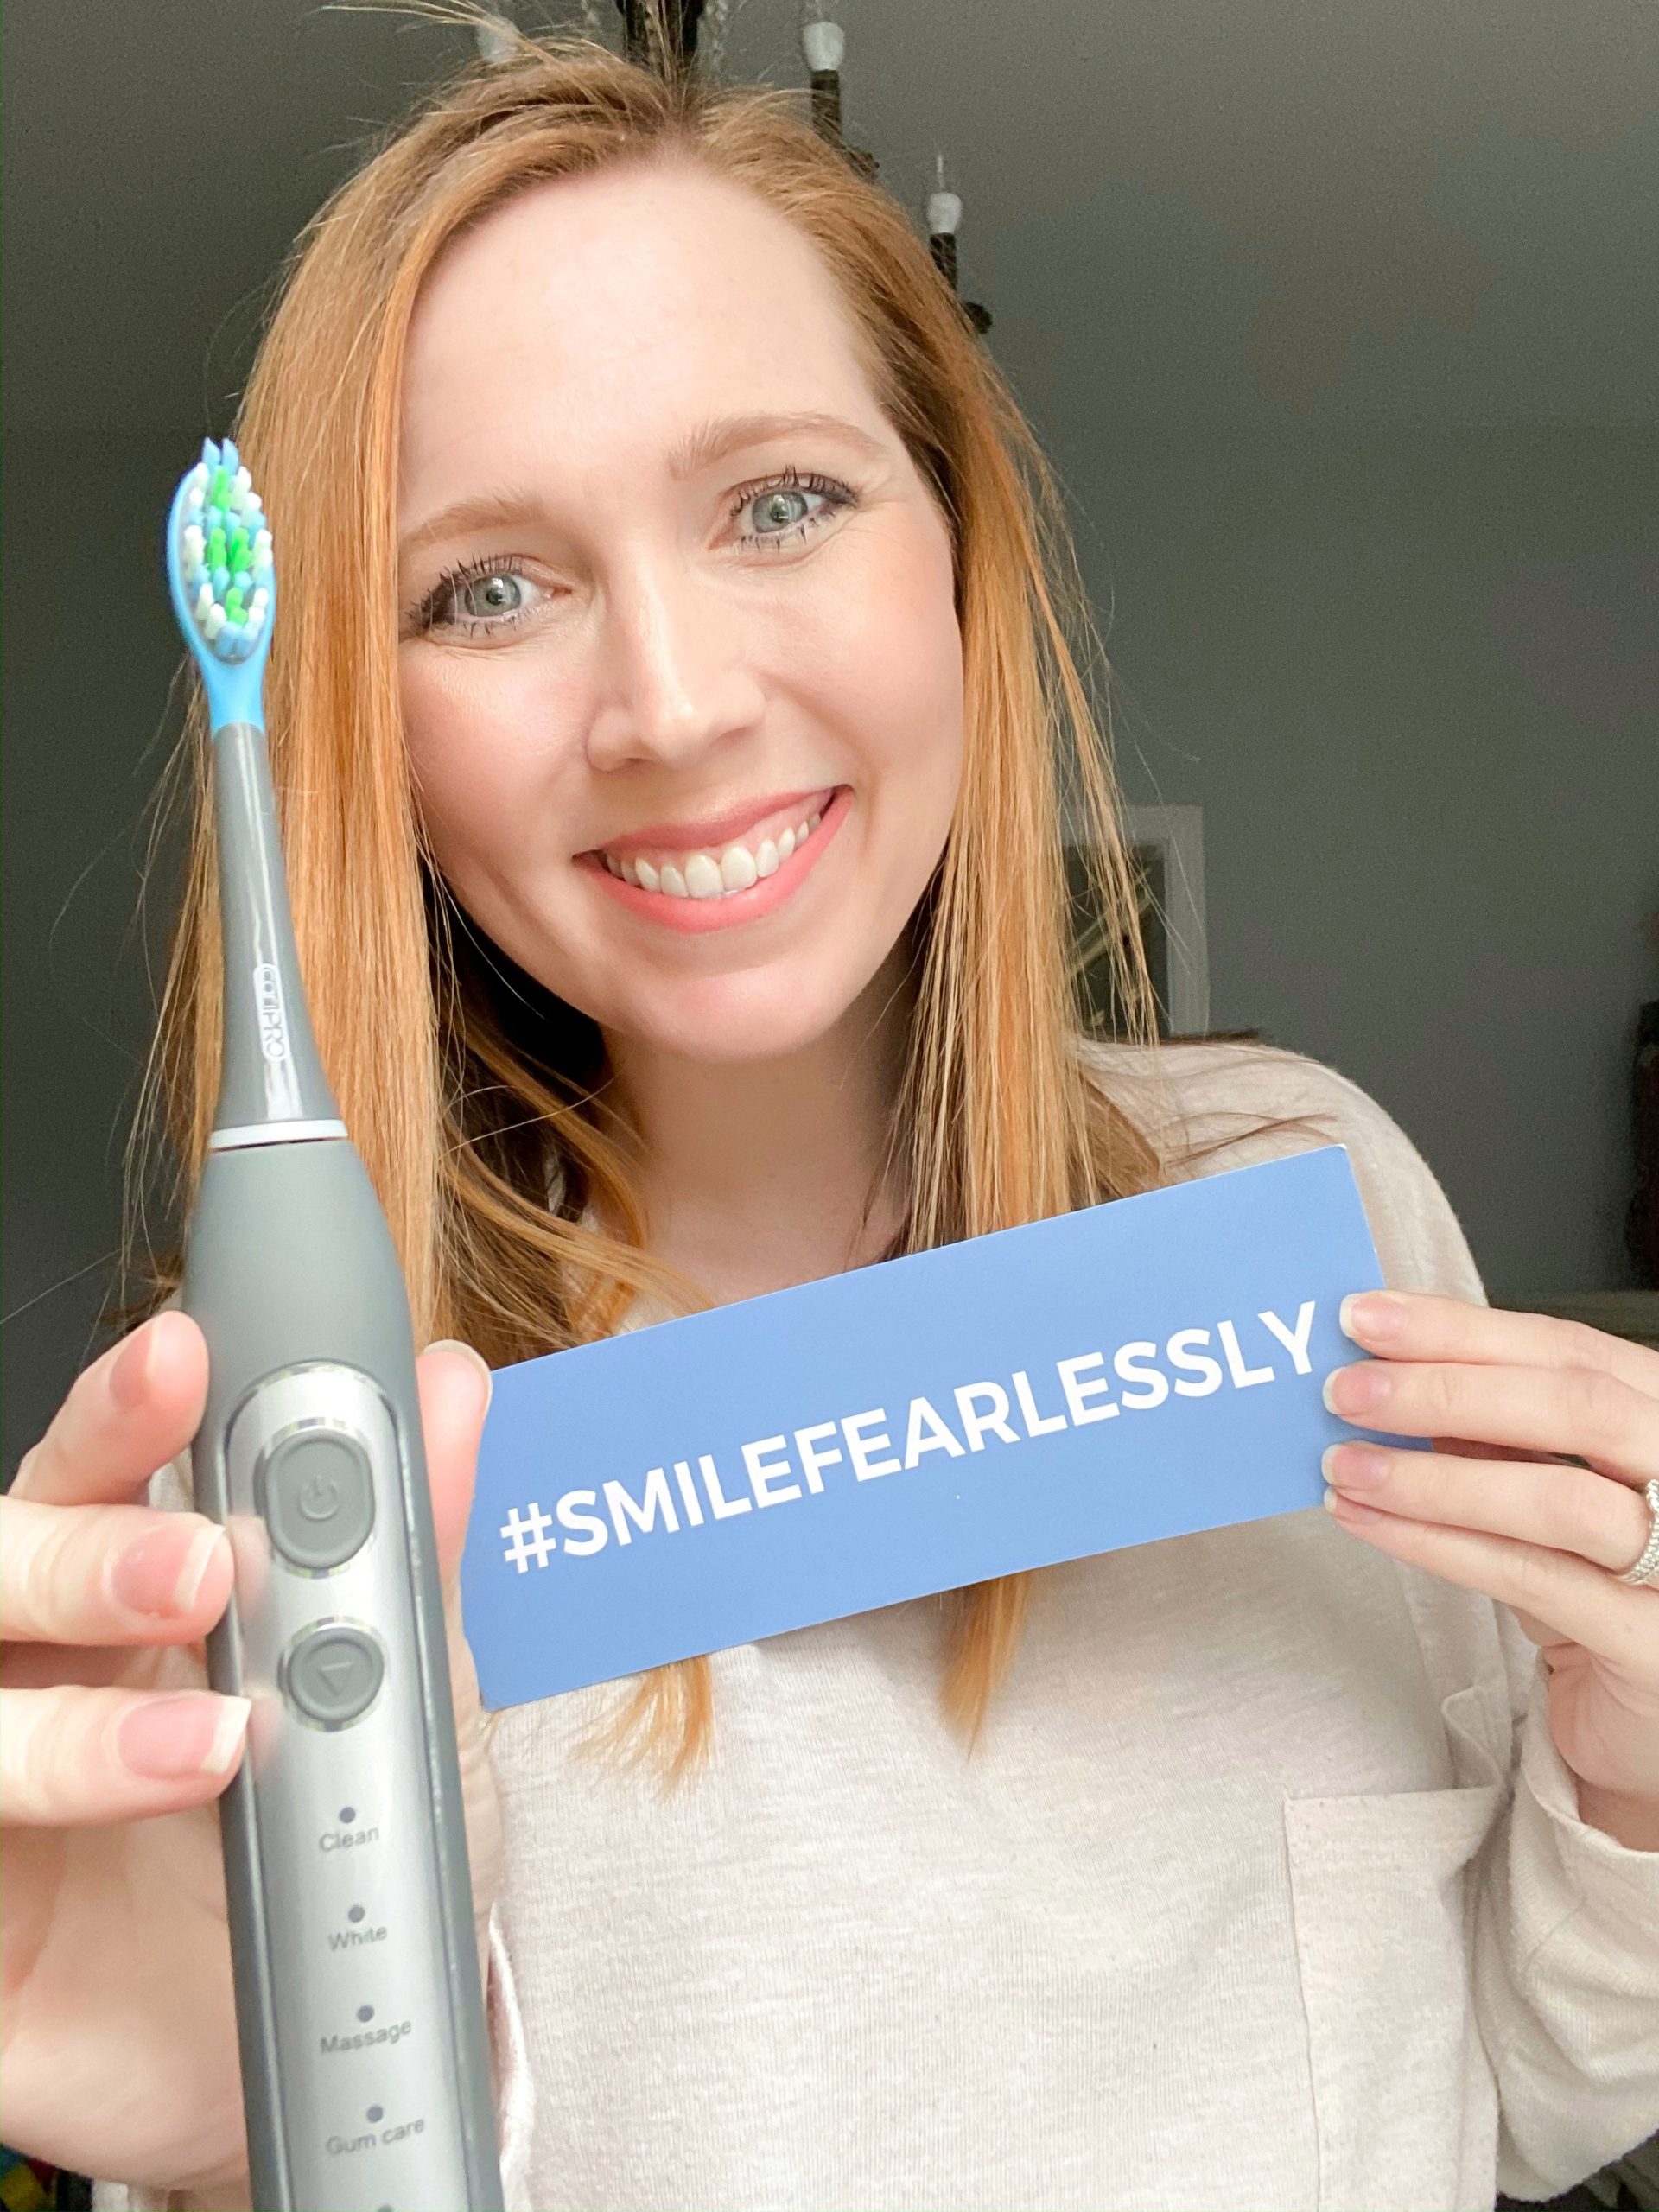 The cariPRO Electric Toothbrush + GIVEAWAY